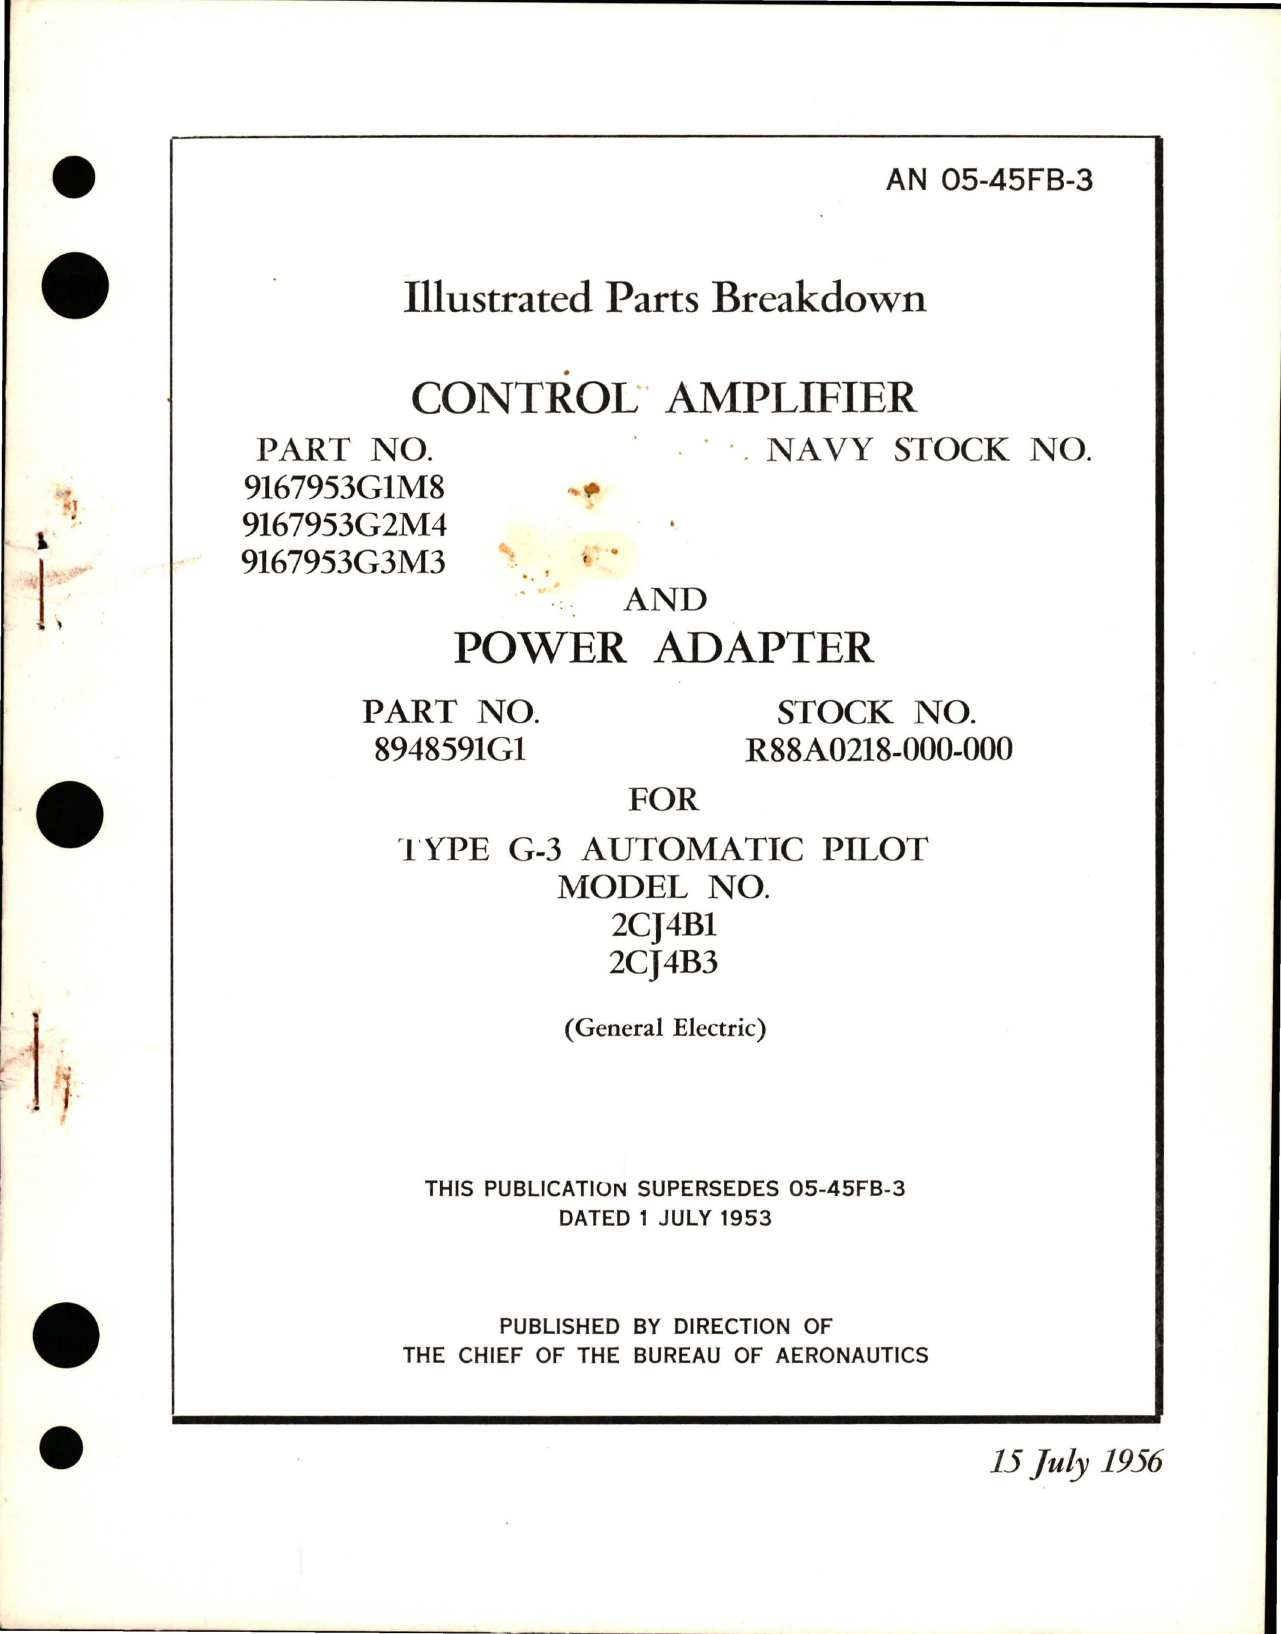 Sample page 1 from AirCorps Library document: Illustrated Parts Breakdown for Control Amplifier and Power Adapter for G-3 Auto Pilot Models 2CJ4B1and 2CJ4B3